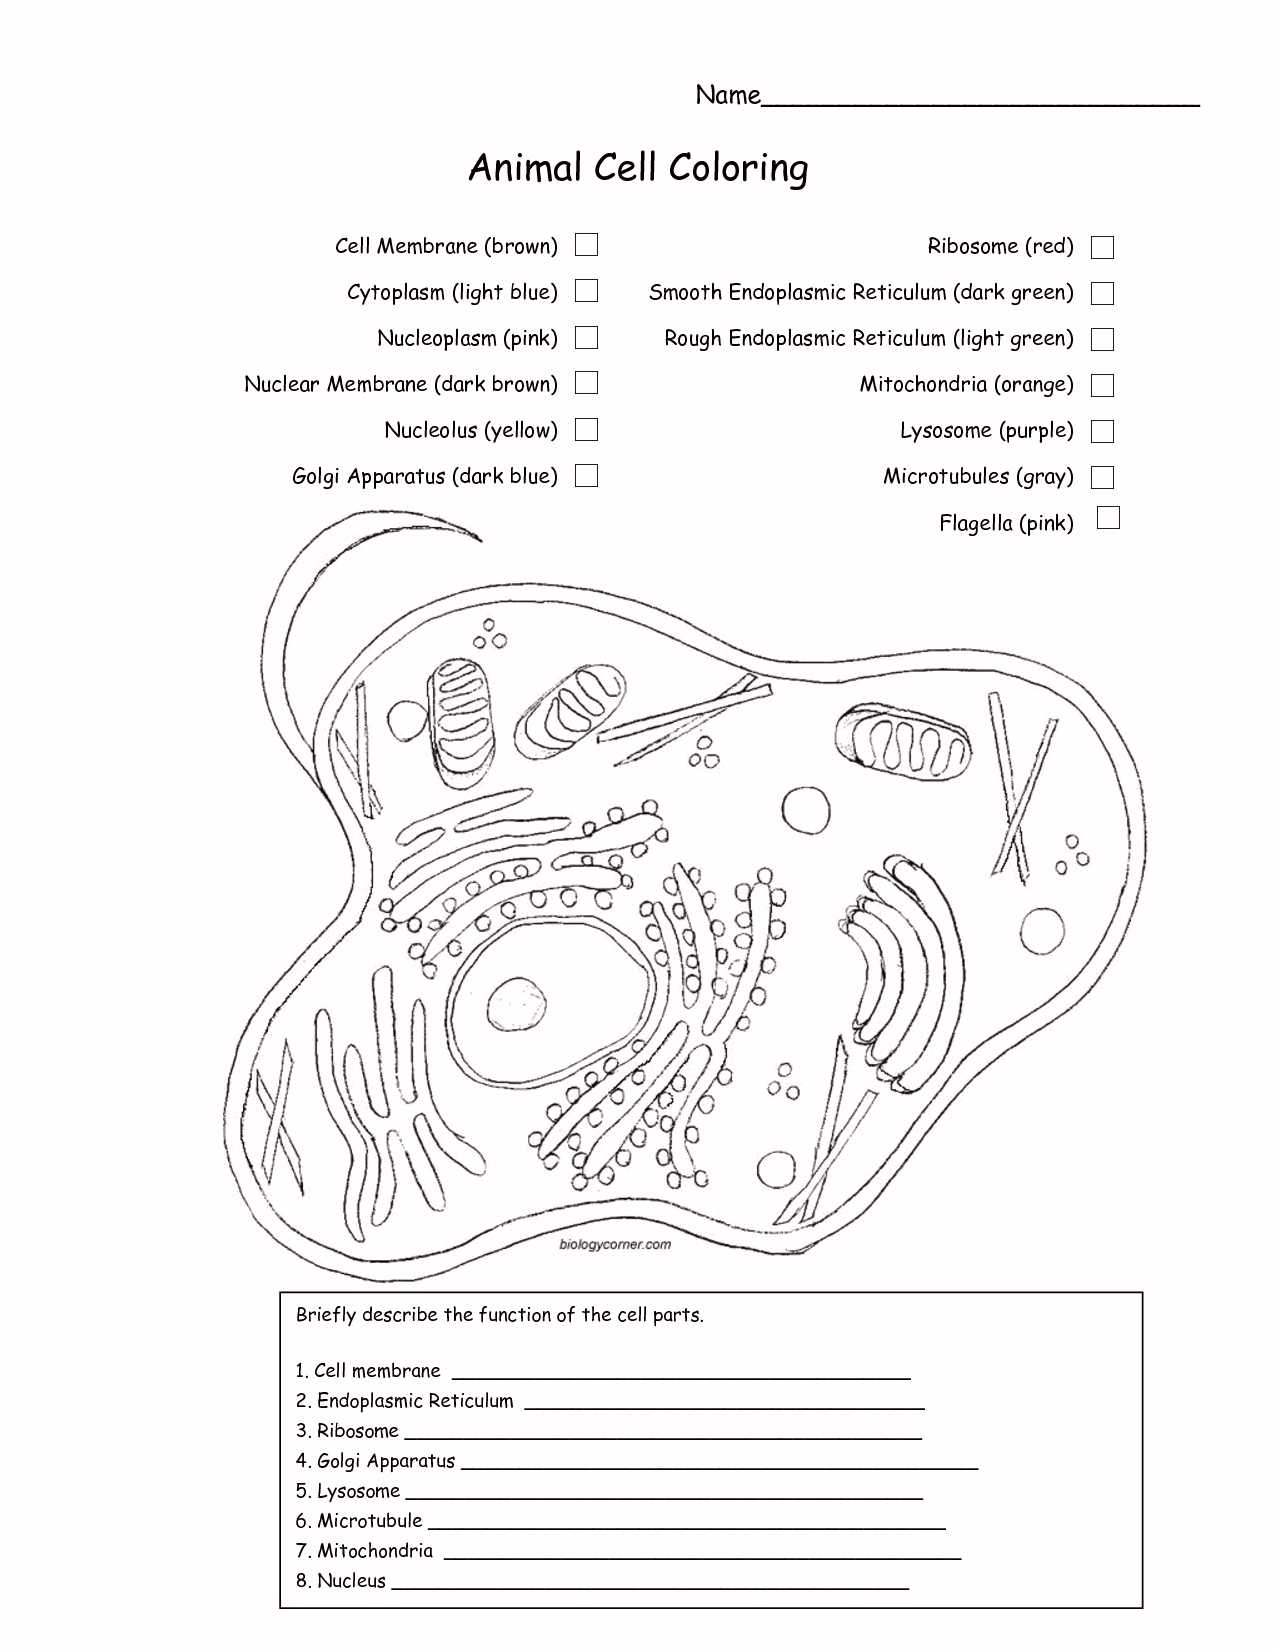 Cell Membrane and Transport Worksheet Answers Along with 35 Beautiful Cell Membrane Coloring Worksheet Answer Key